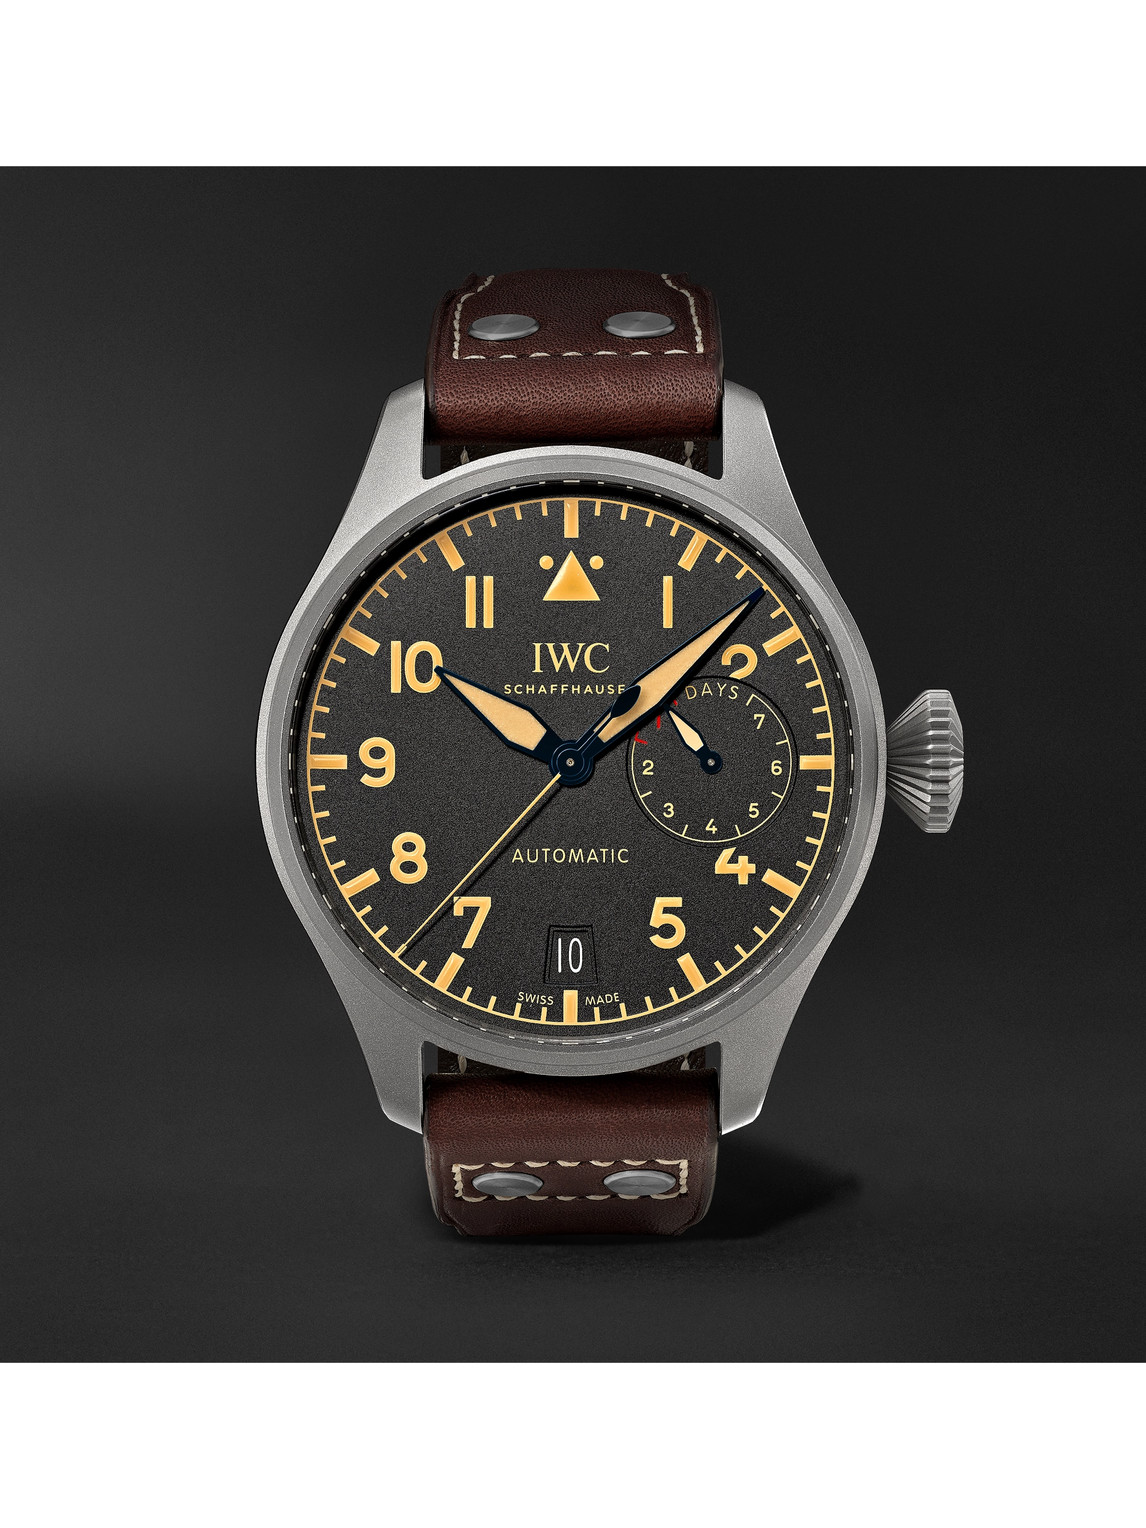 Iwc Schaffhausen Big Pilot's Heritage Automatic 46.2mm Titanium And Leather Watch, Ref. No. Iw501004 In Black